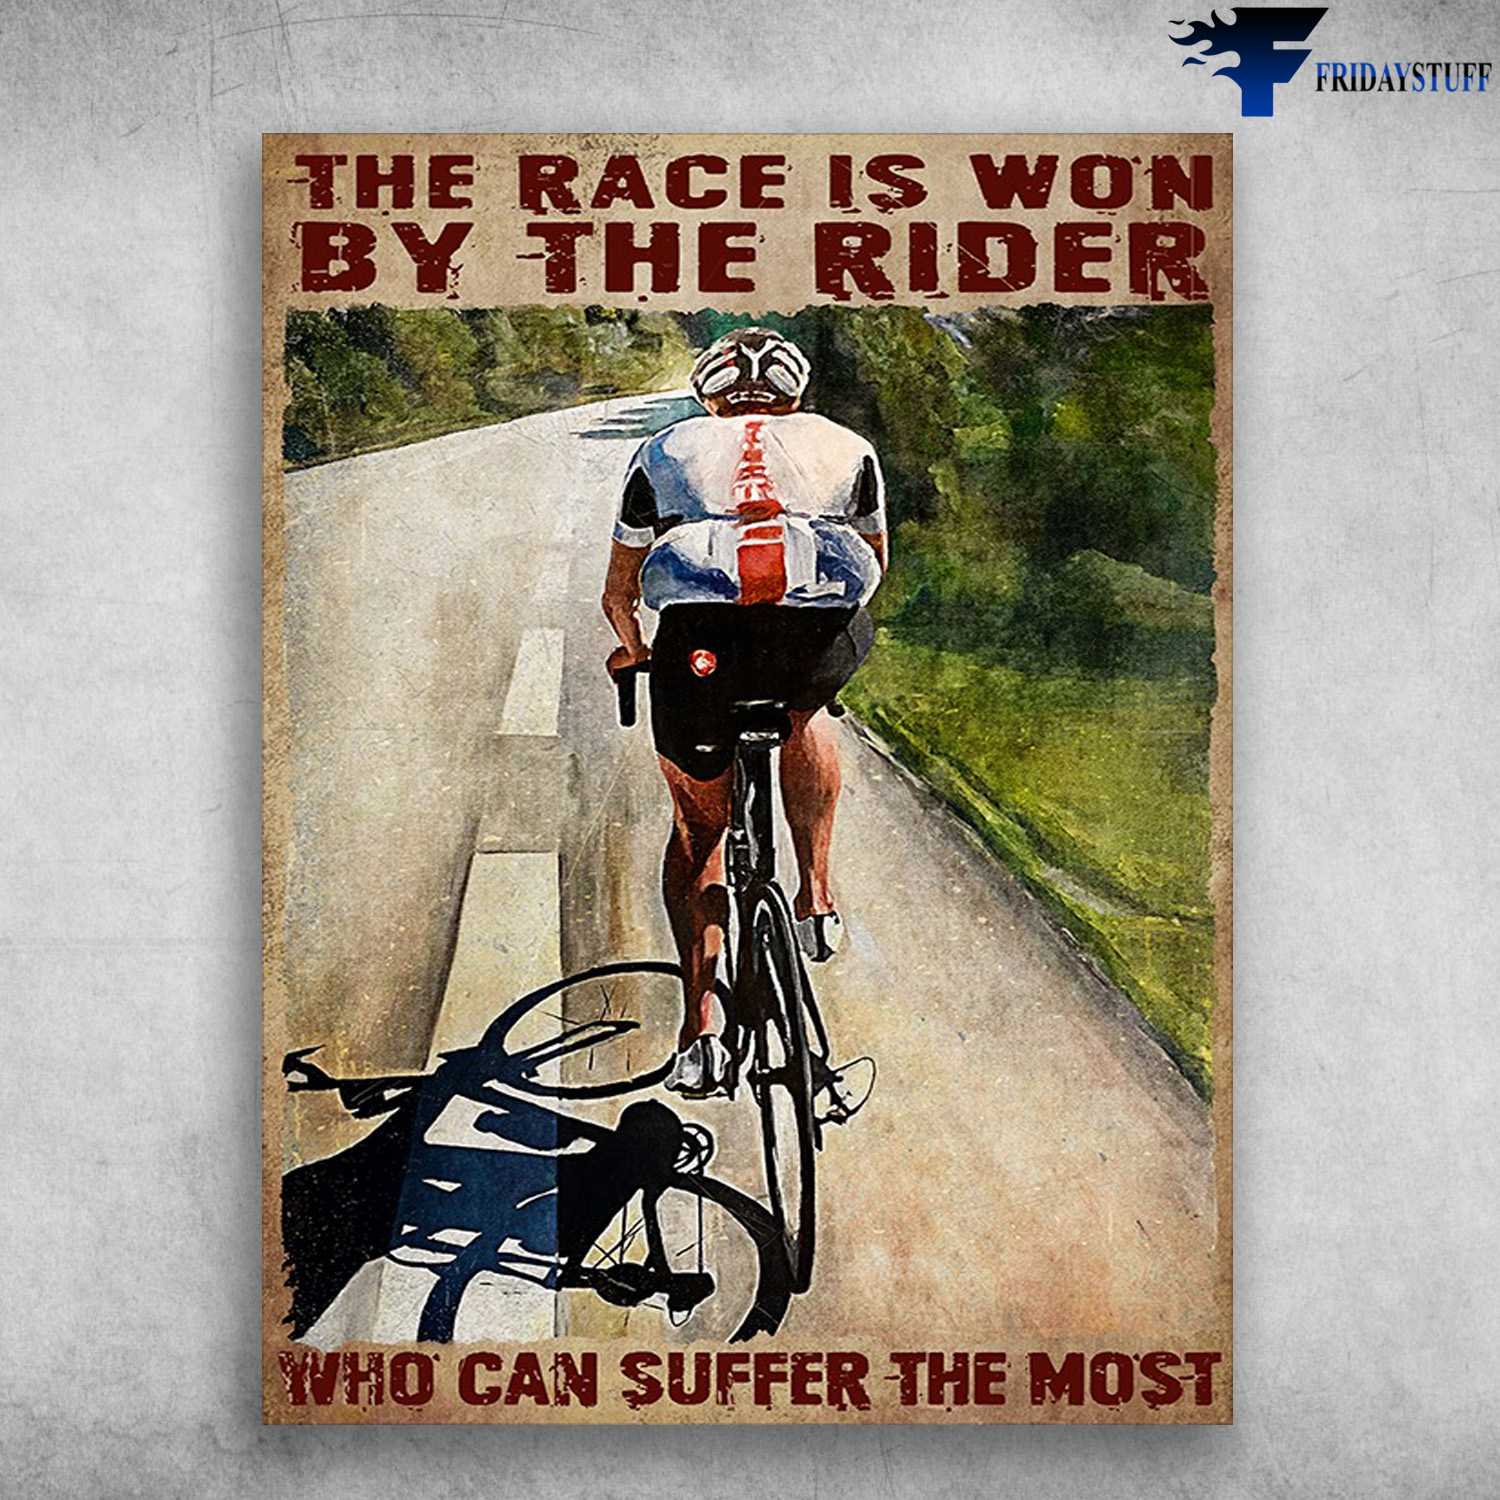 Man Cycling, Biker Poster, Bicycle Race - The Race Is Won By The Rider, Who Can Suffer The Most